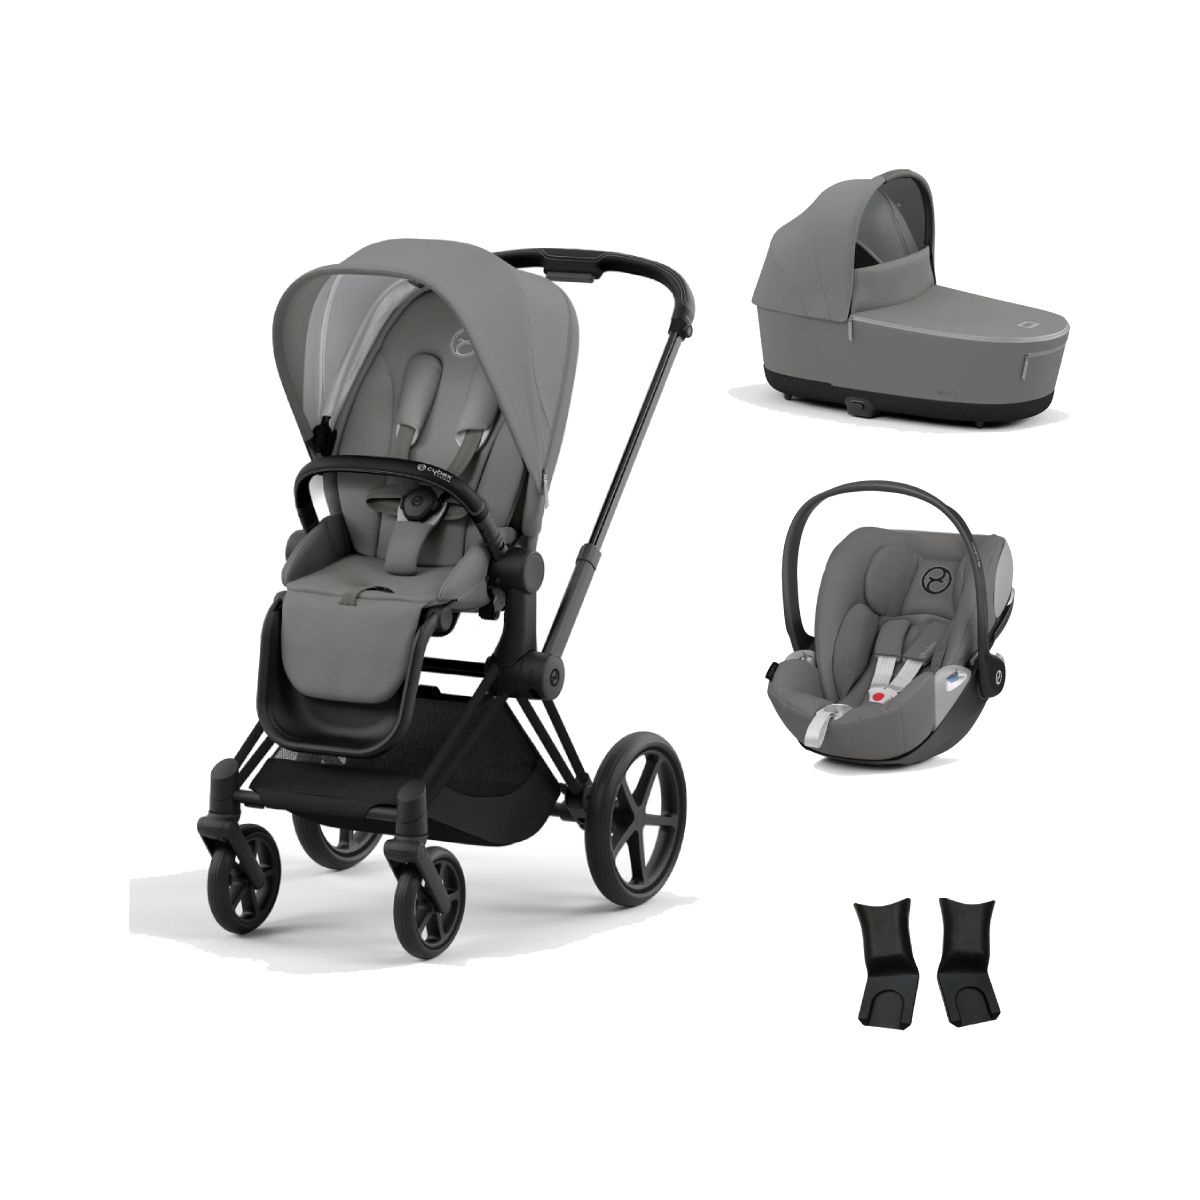 Cybex Priam Black Pushchair with Lux Carry Cot & Cloud Z Car Seat